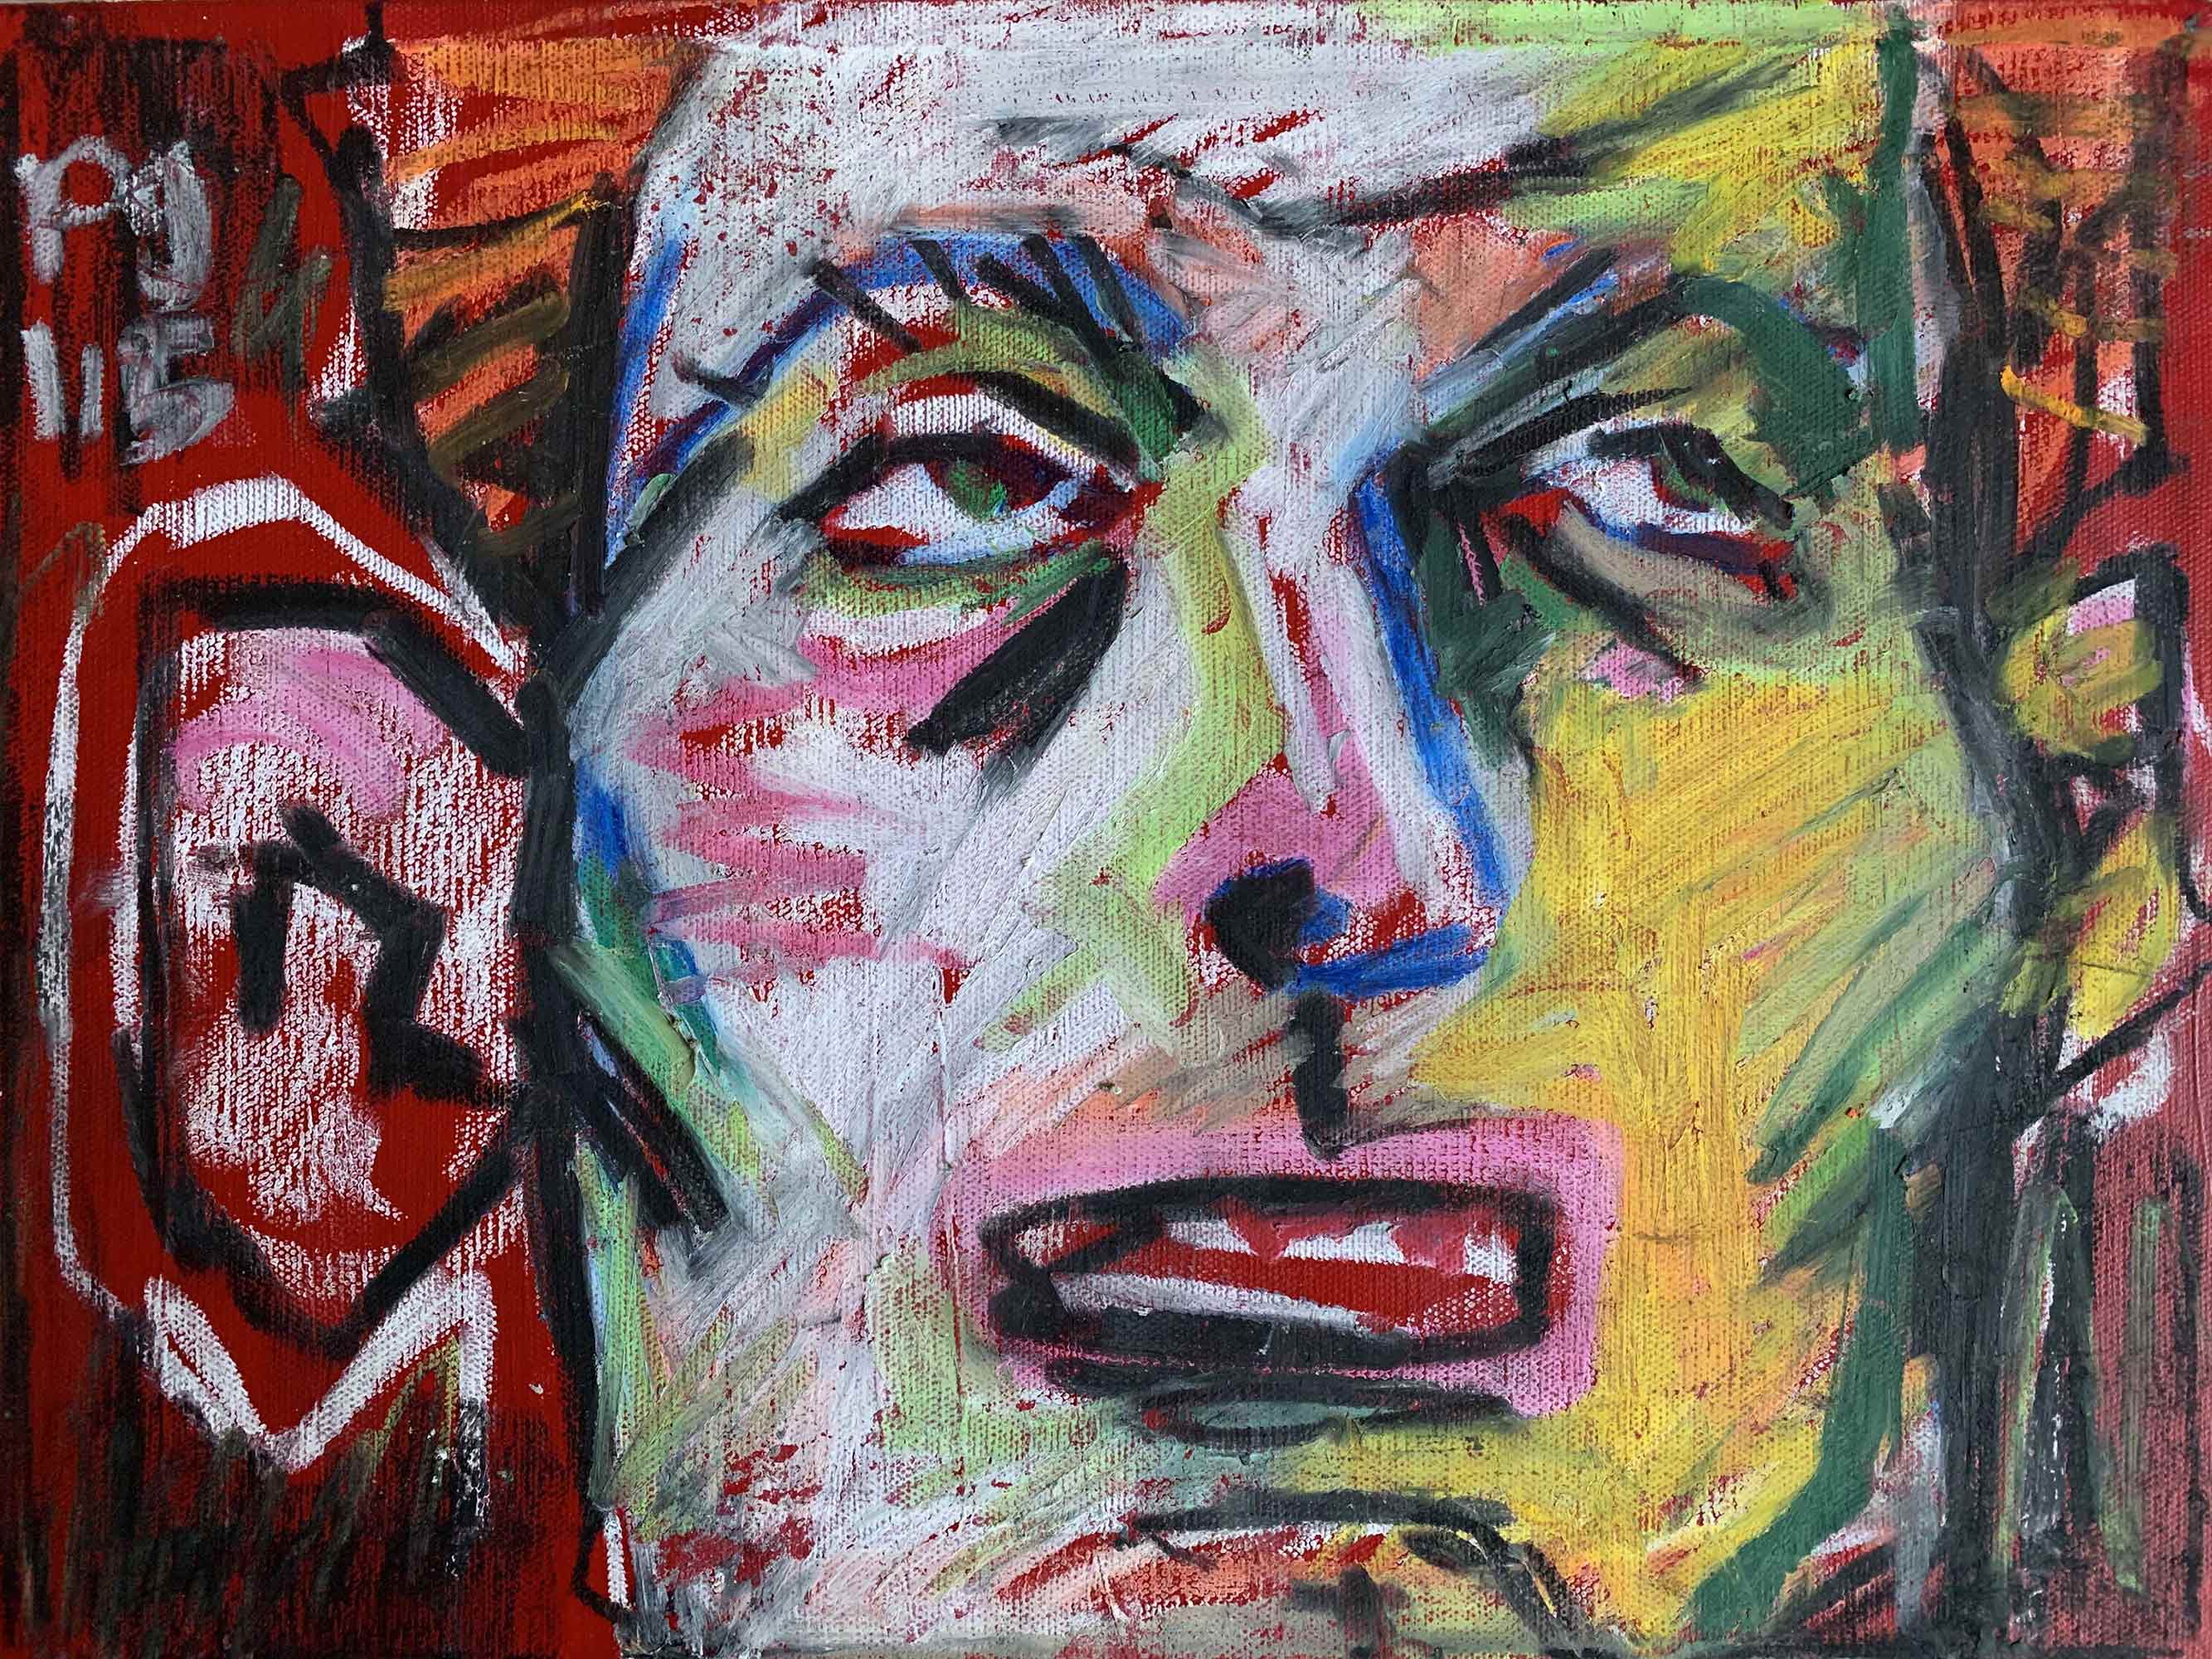 An abstract painting of a person's head